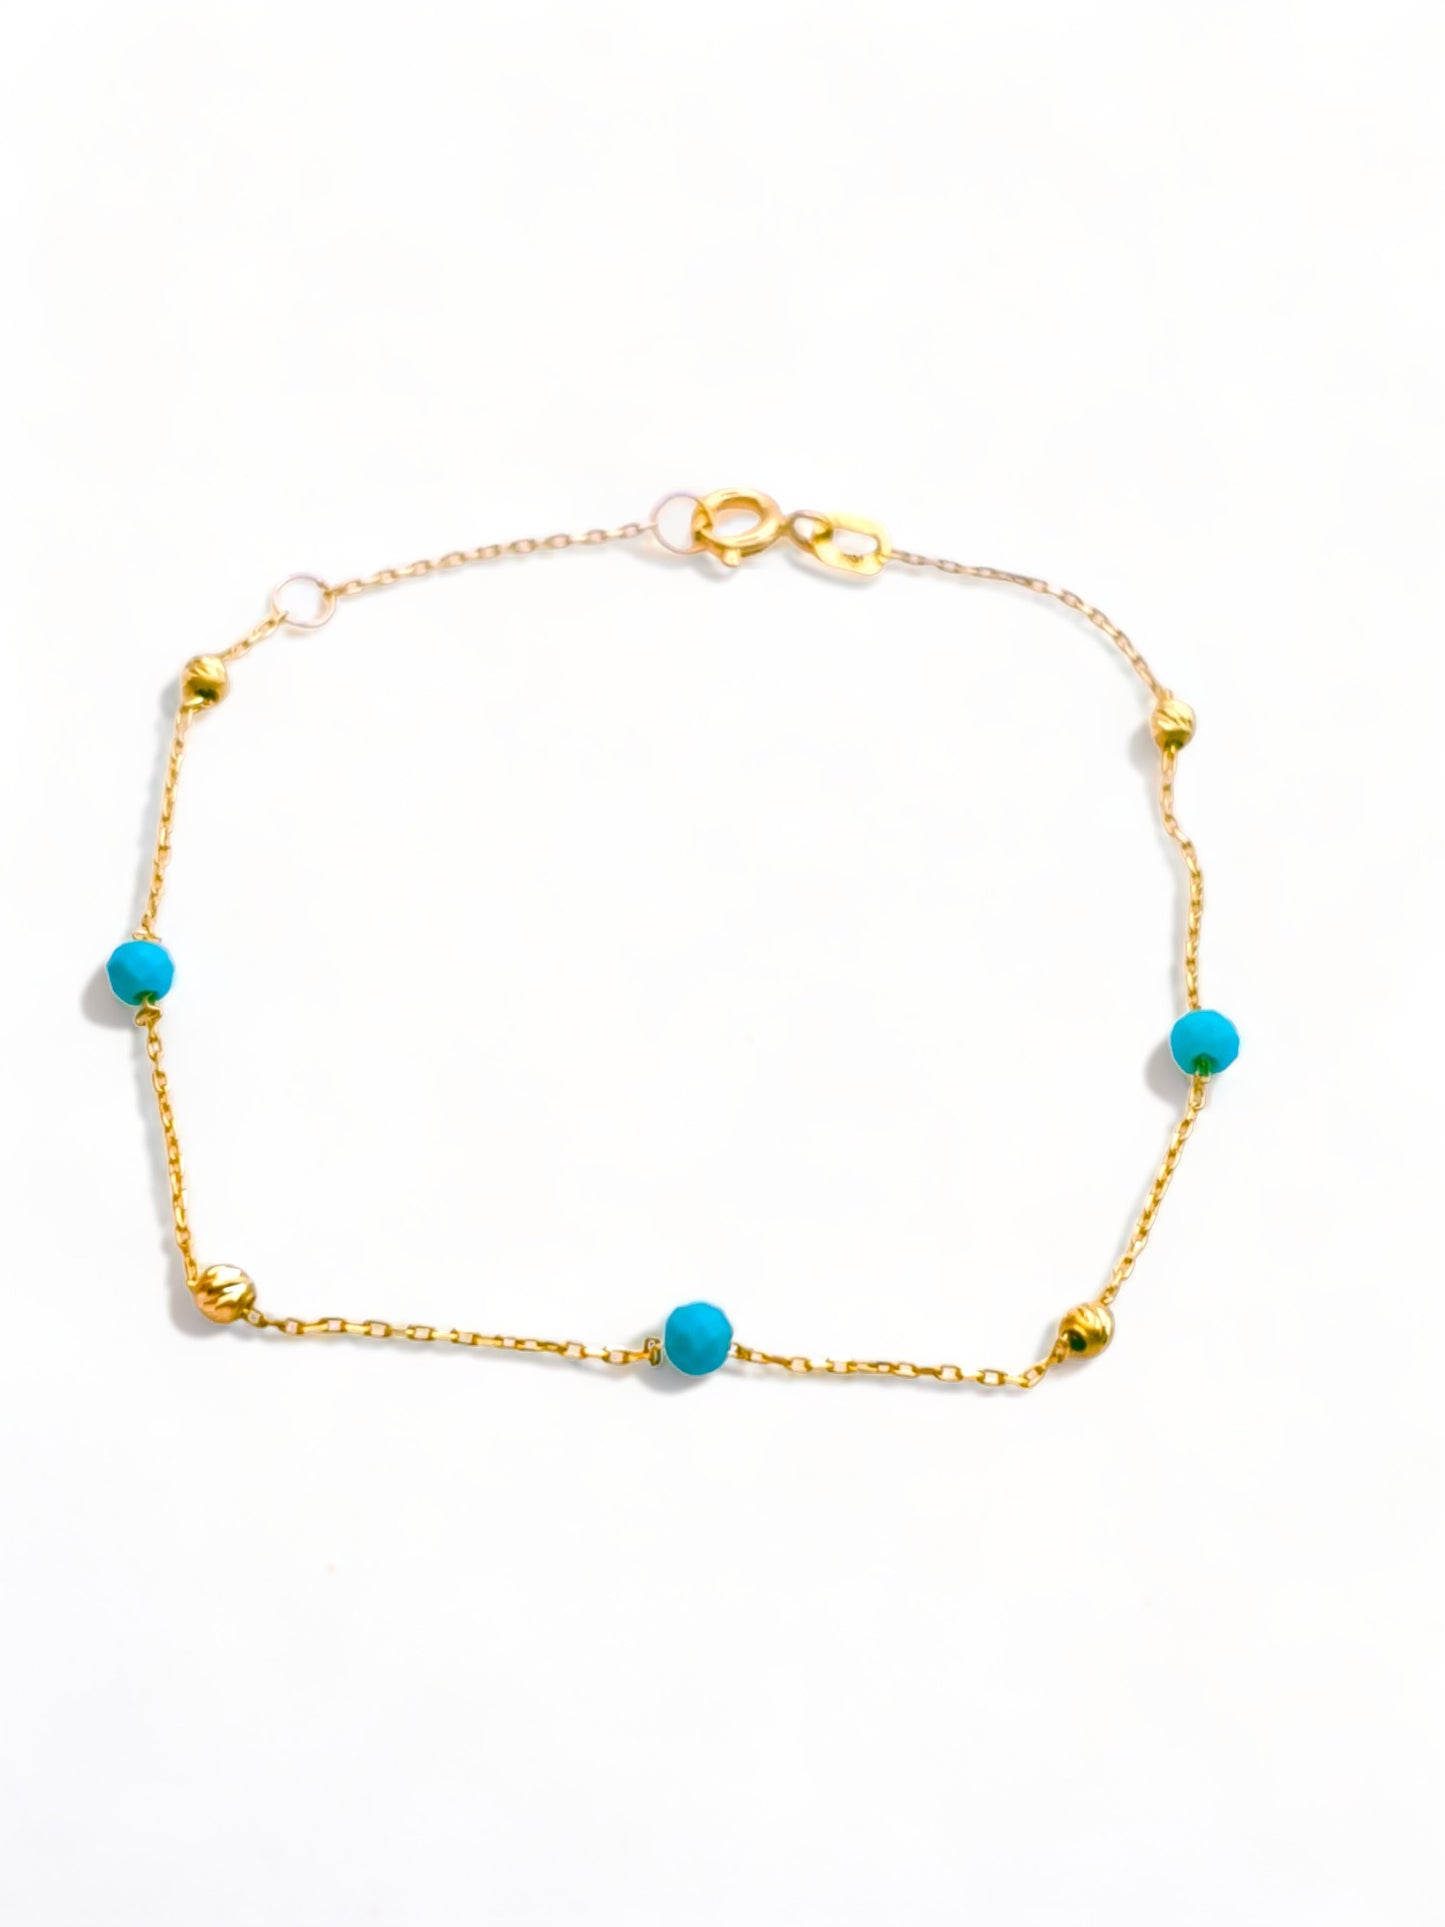 Solid 18ct Gold Women's - Gold & Turquoise Bead Bracelet, top down photo full